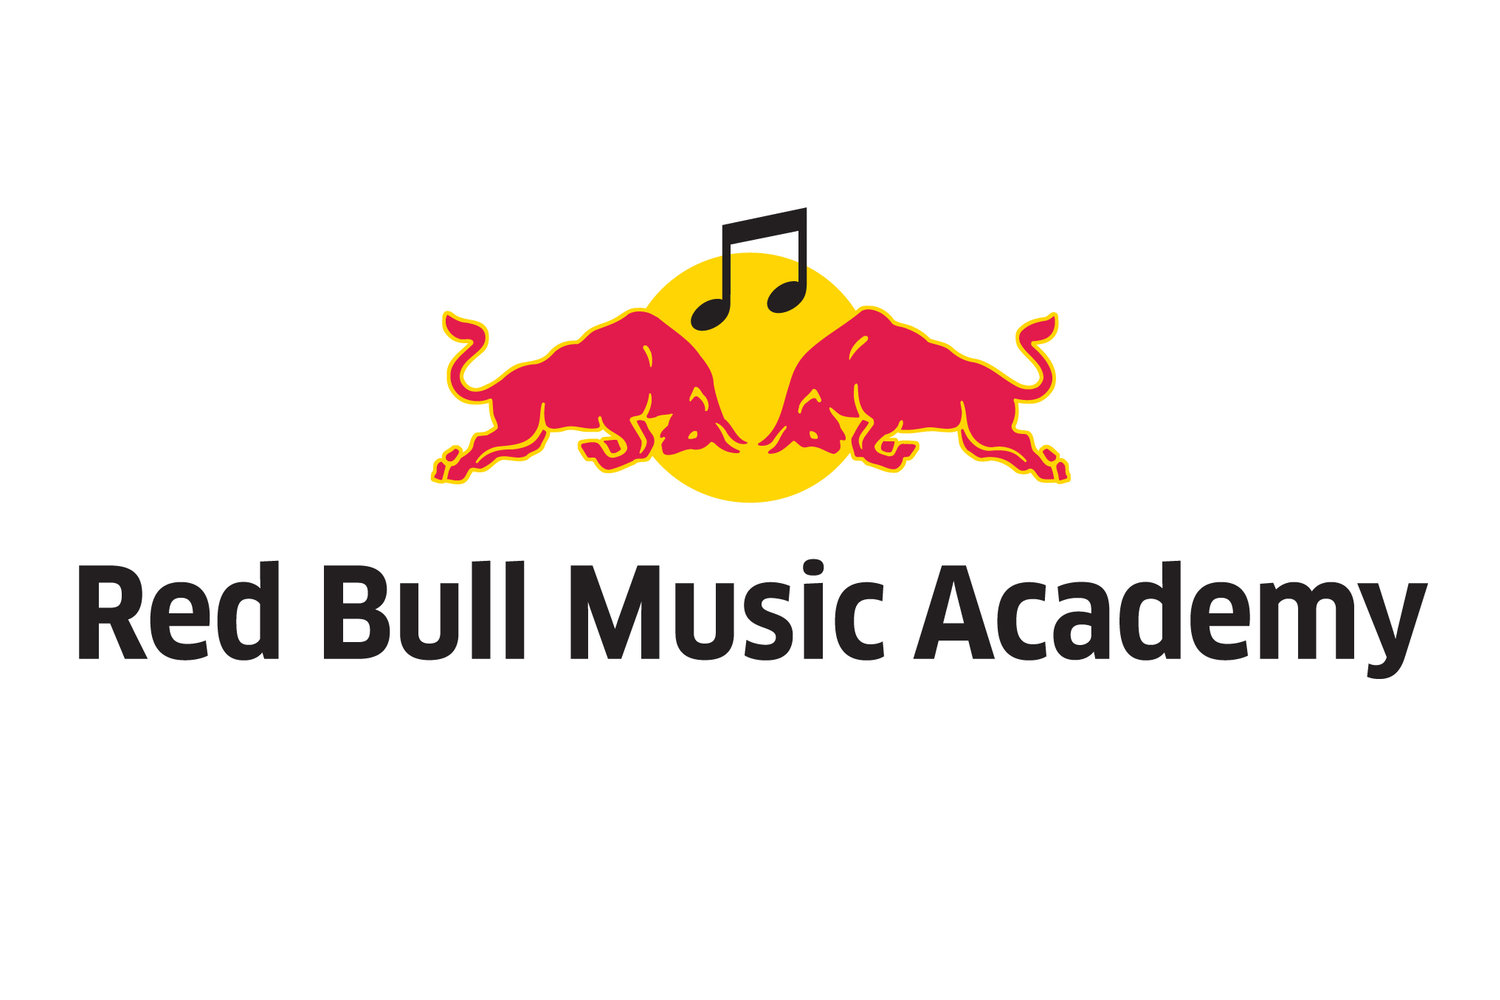 Red Bull Music Academy Application Available (2011)